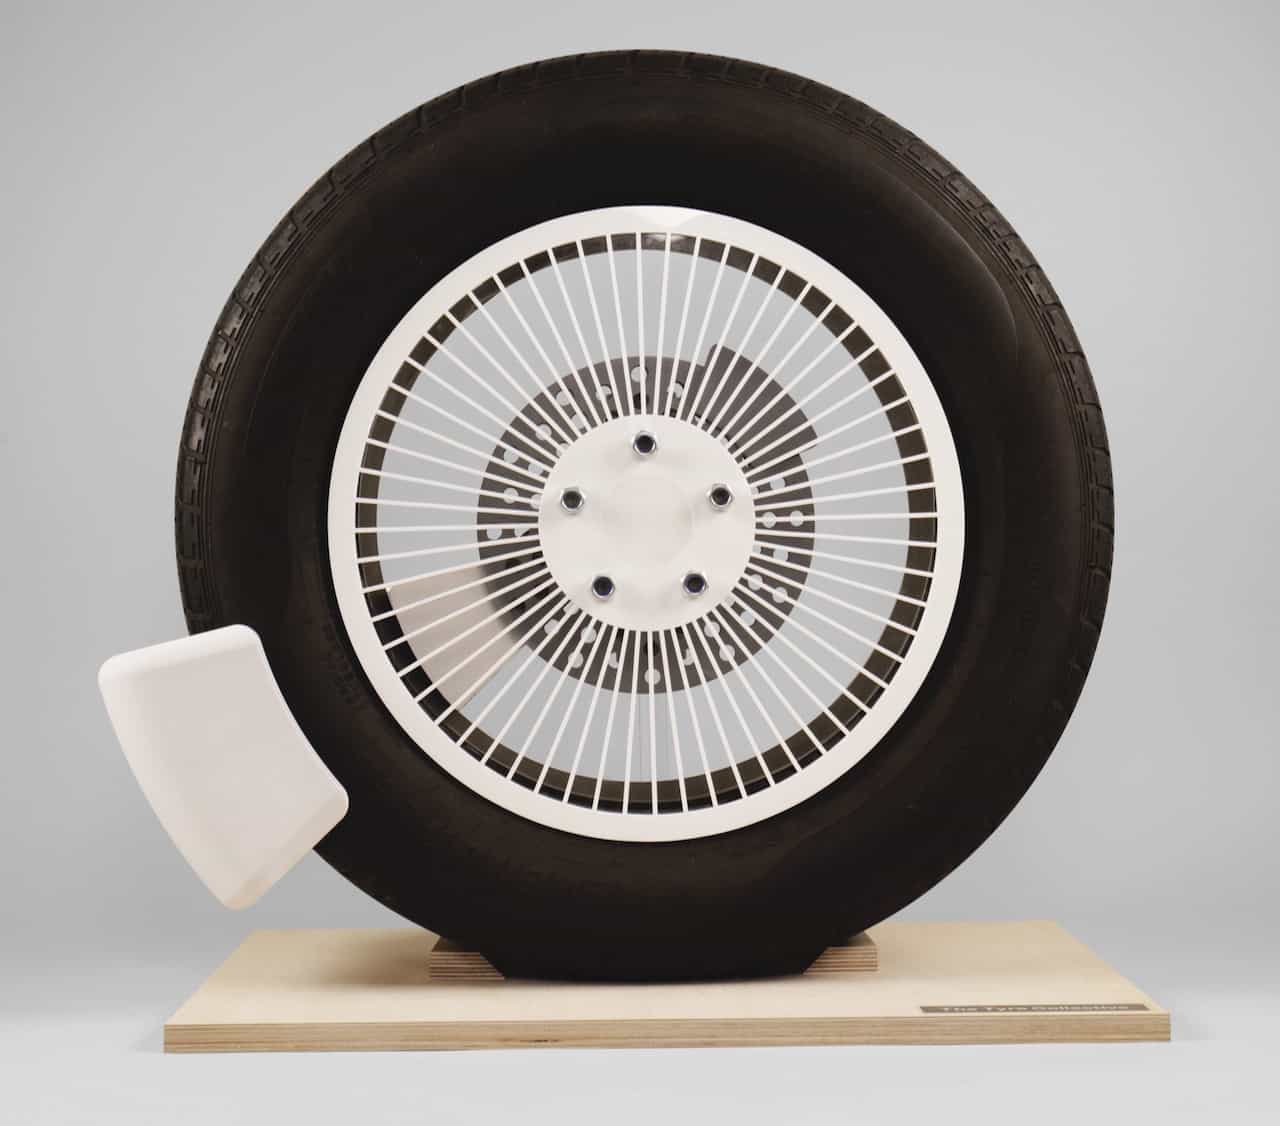 Tyre Collective, Collective creates device to collect bits shed by tires, ClassicCars.com Journal